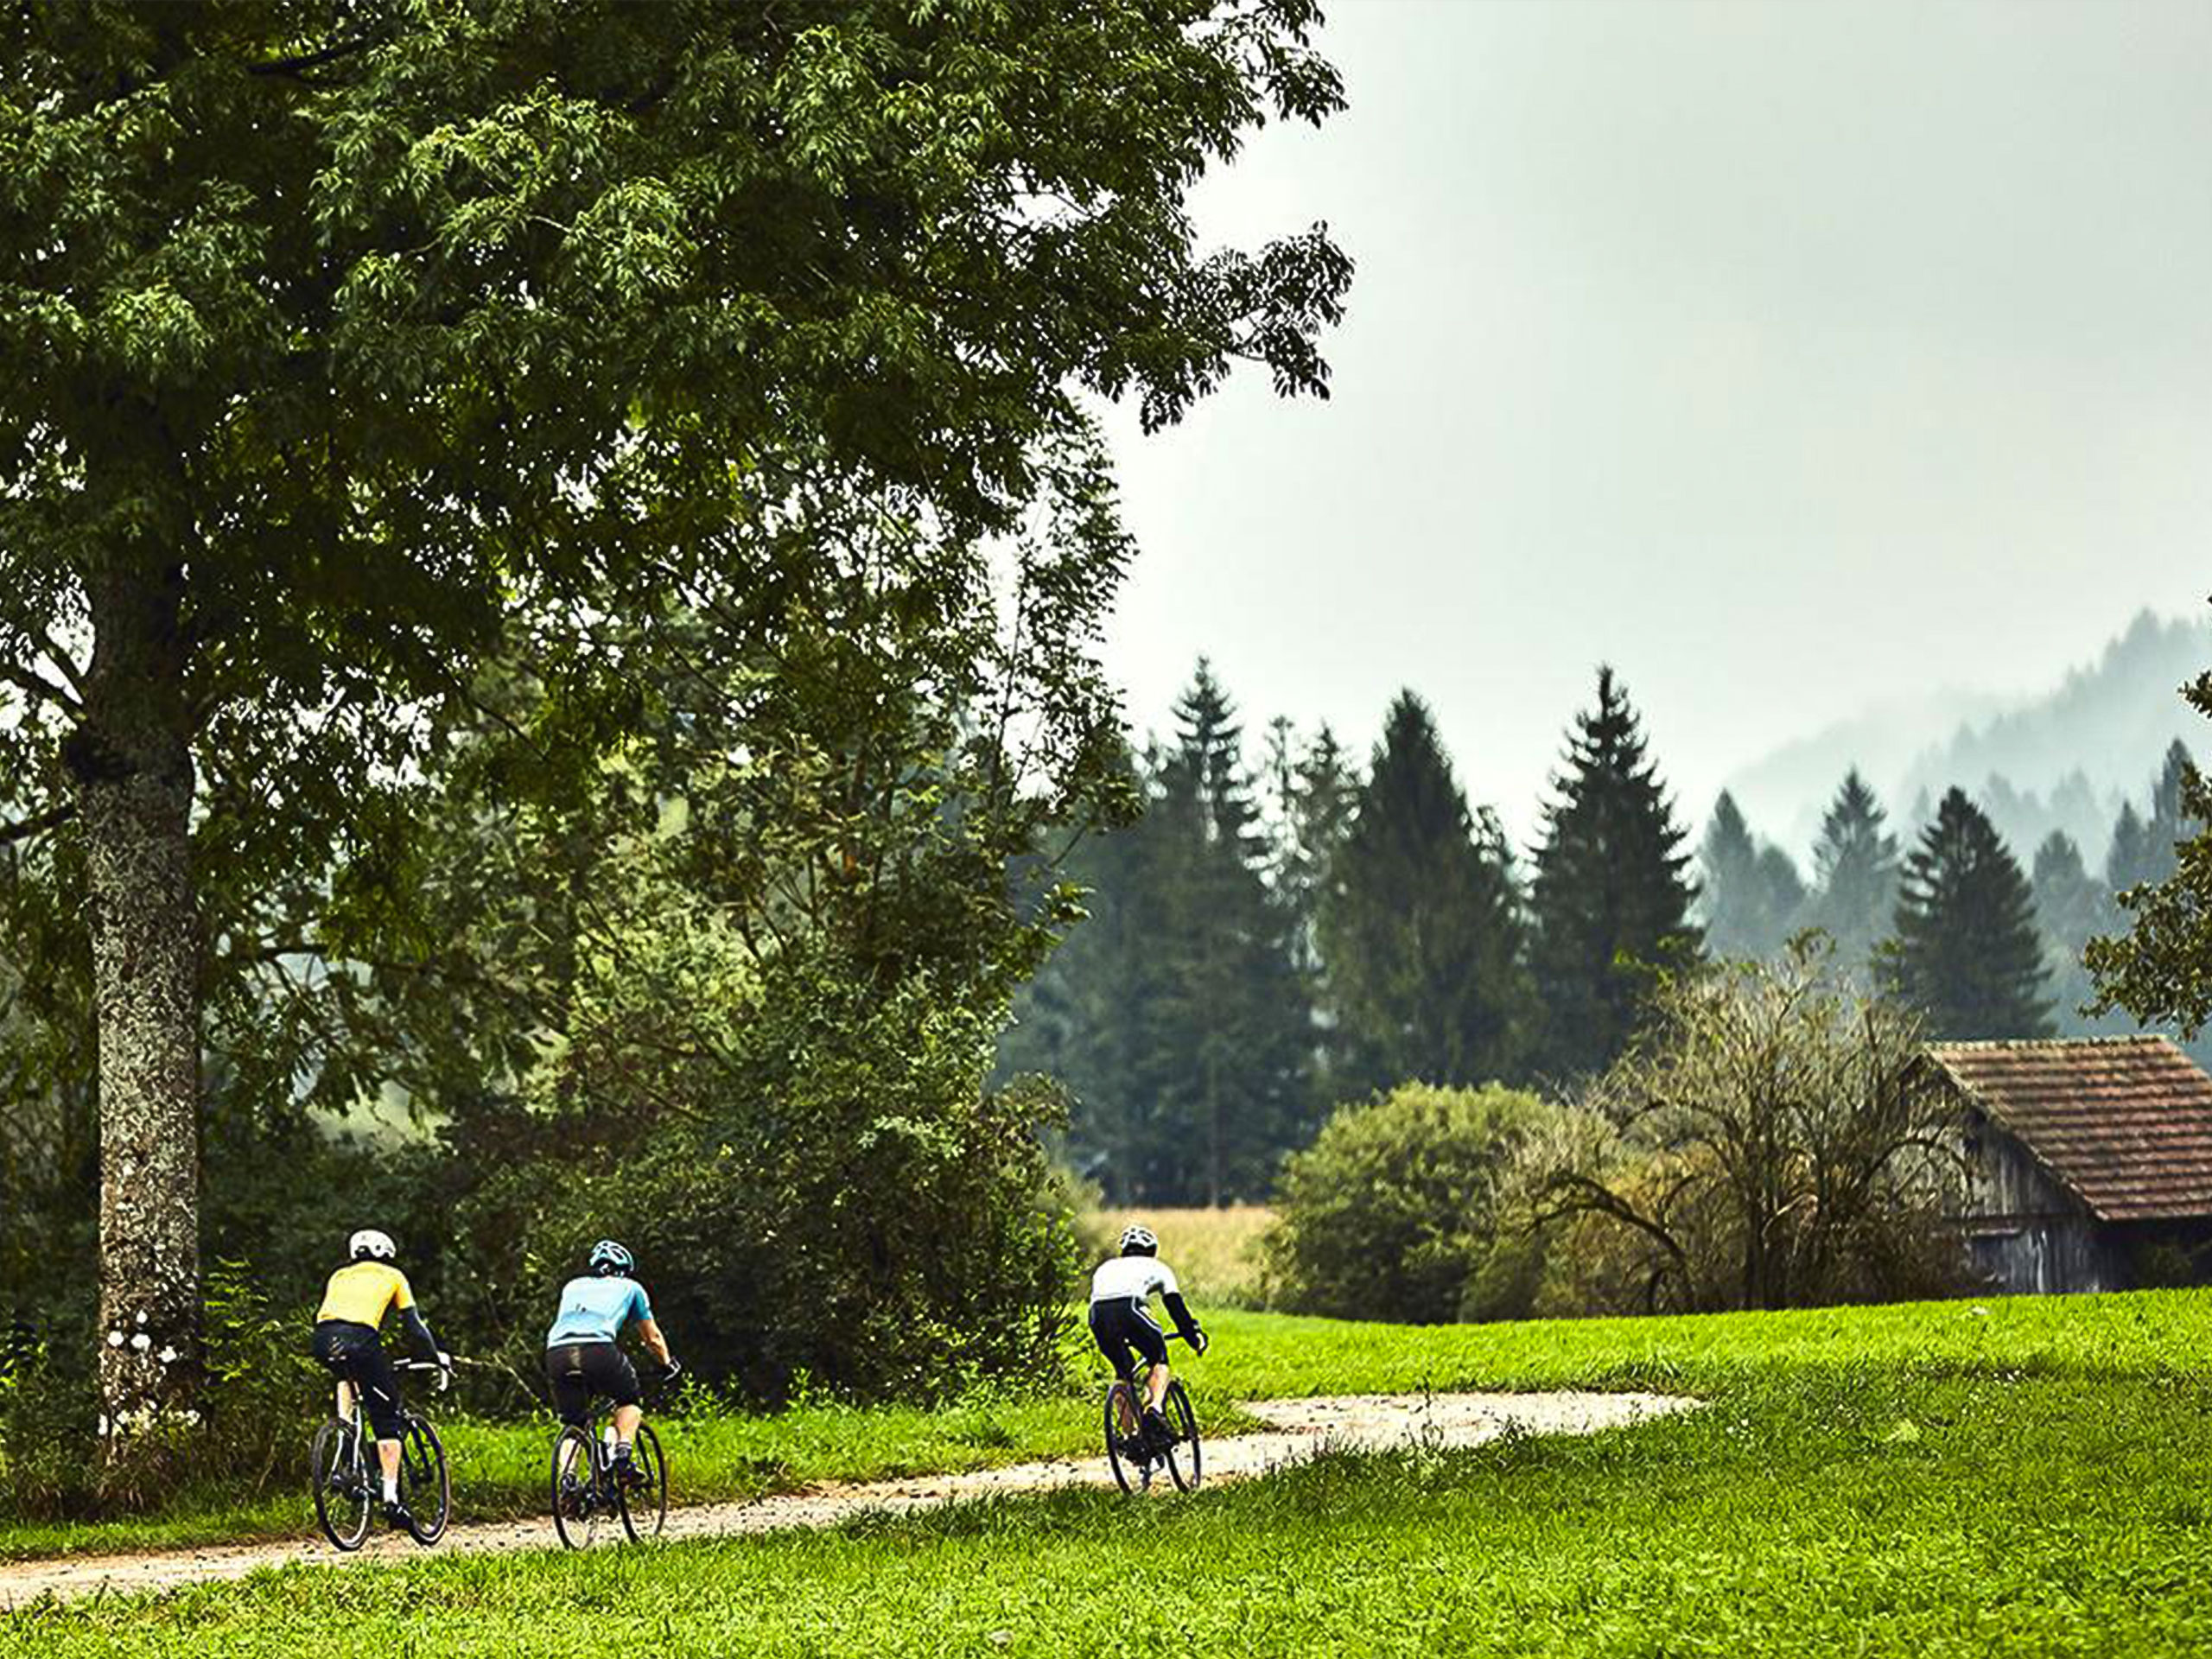 Cyclists on the Road